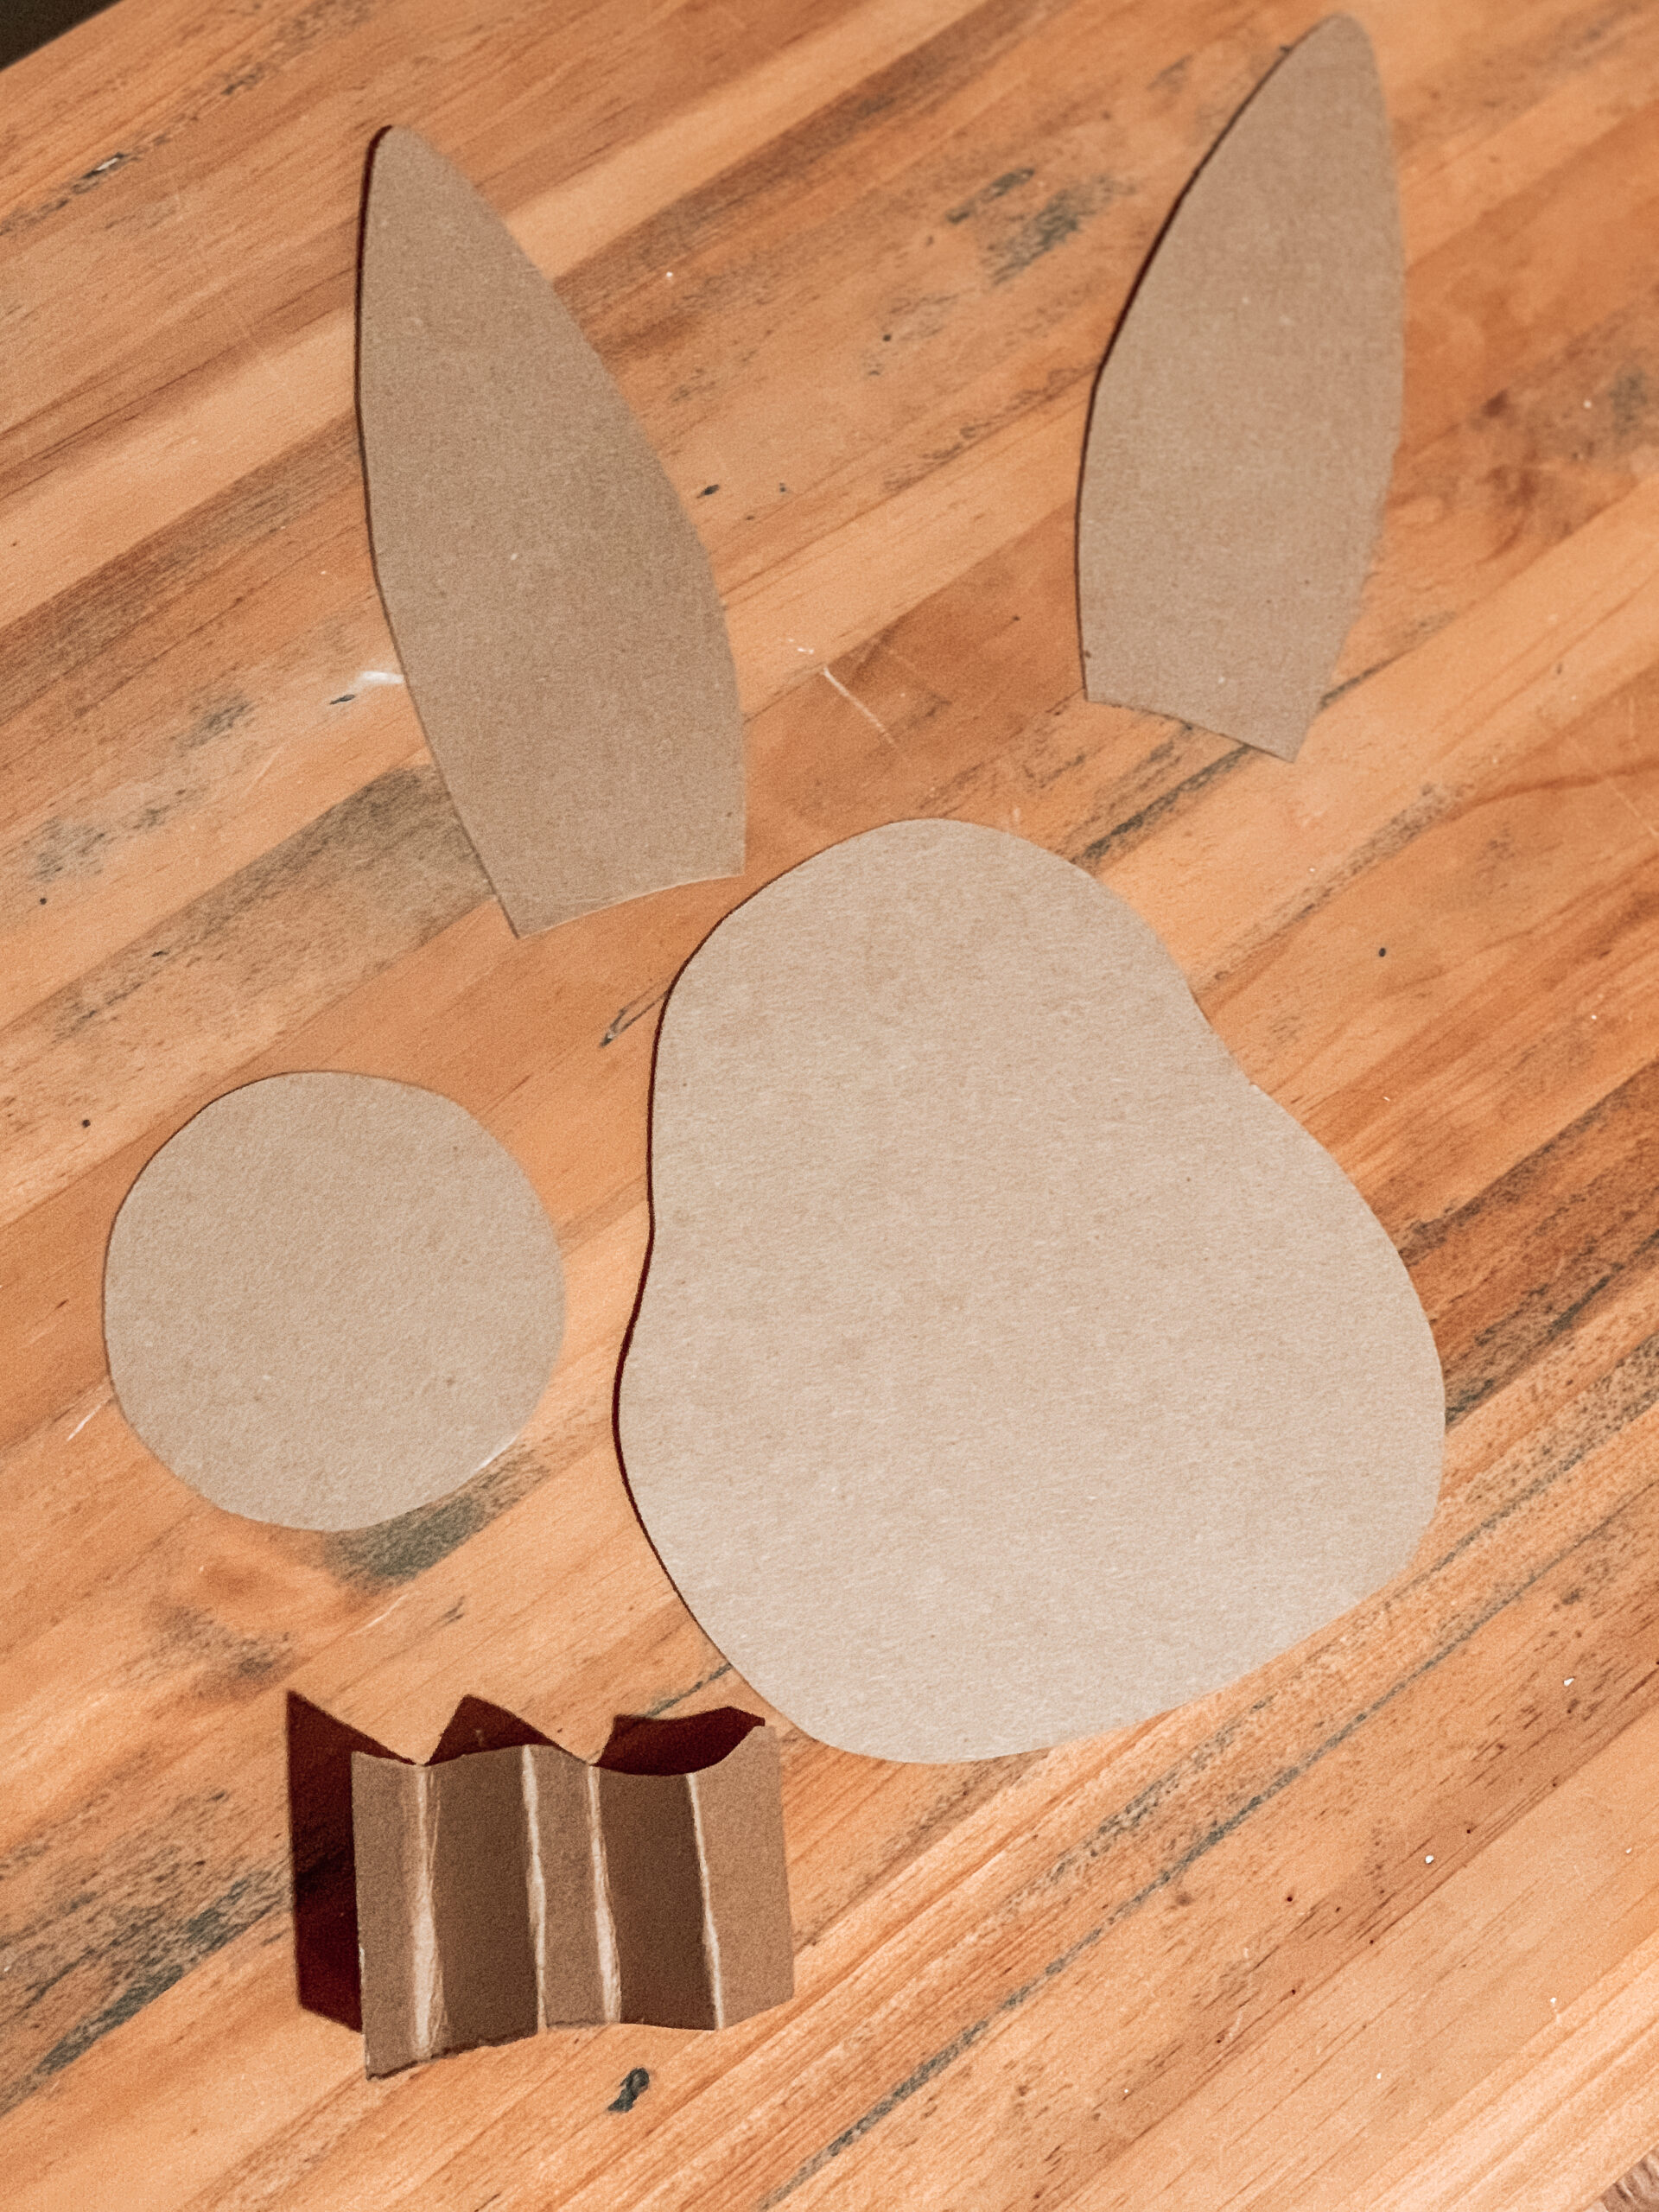 Cutouts needed to create cardboard and clothespin bunny kids activity